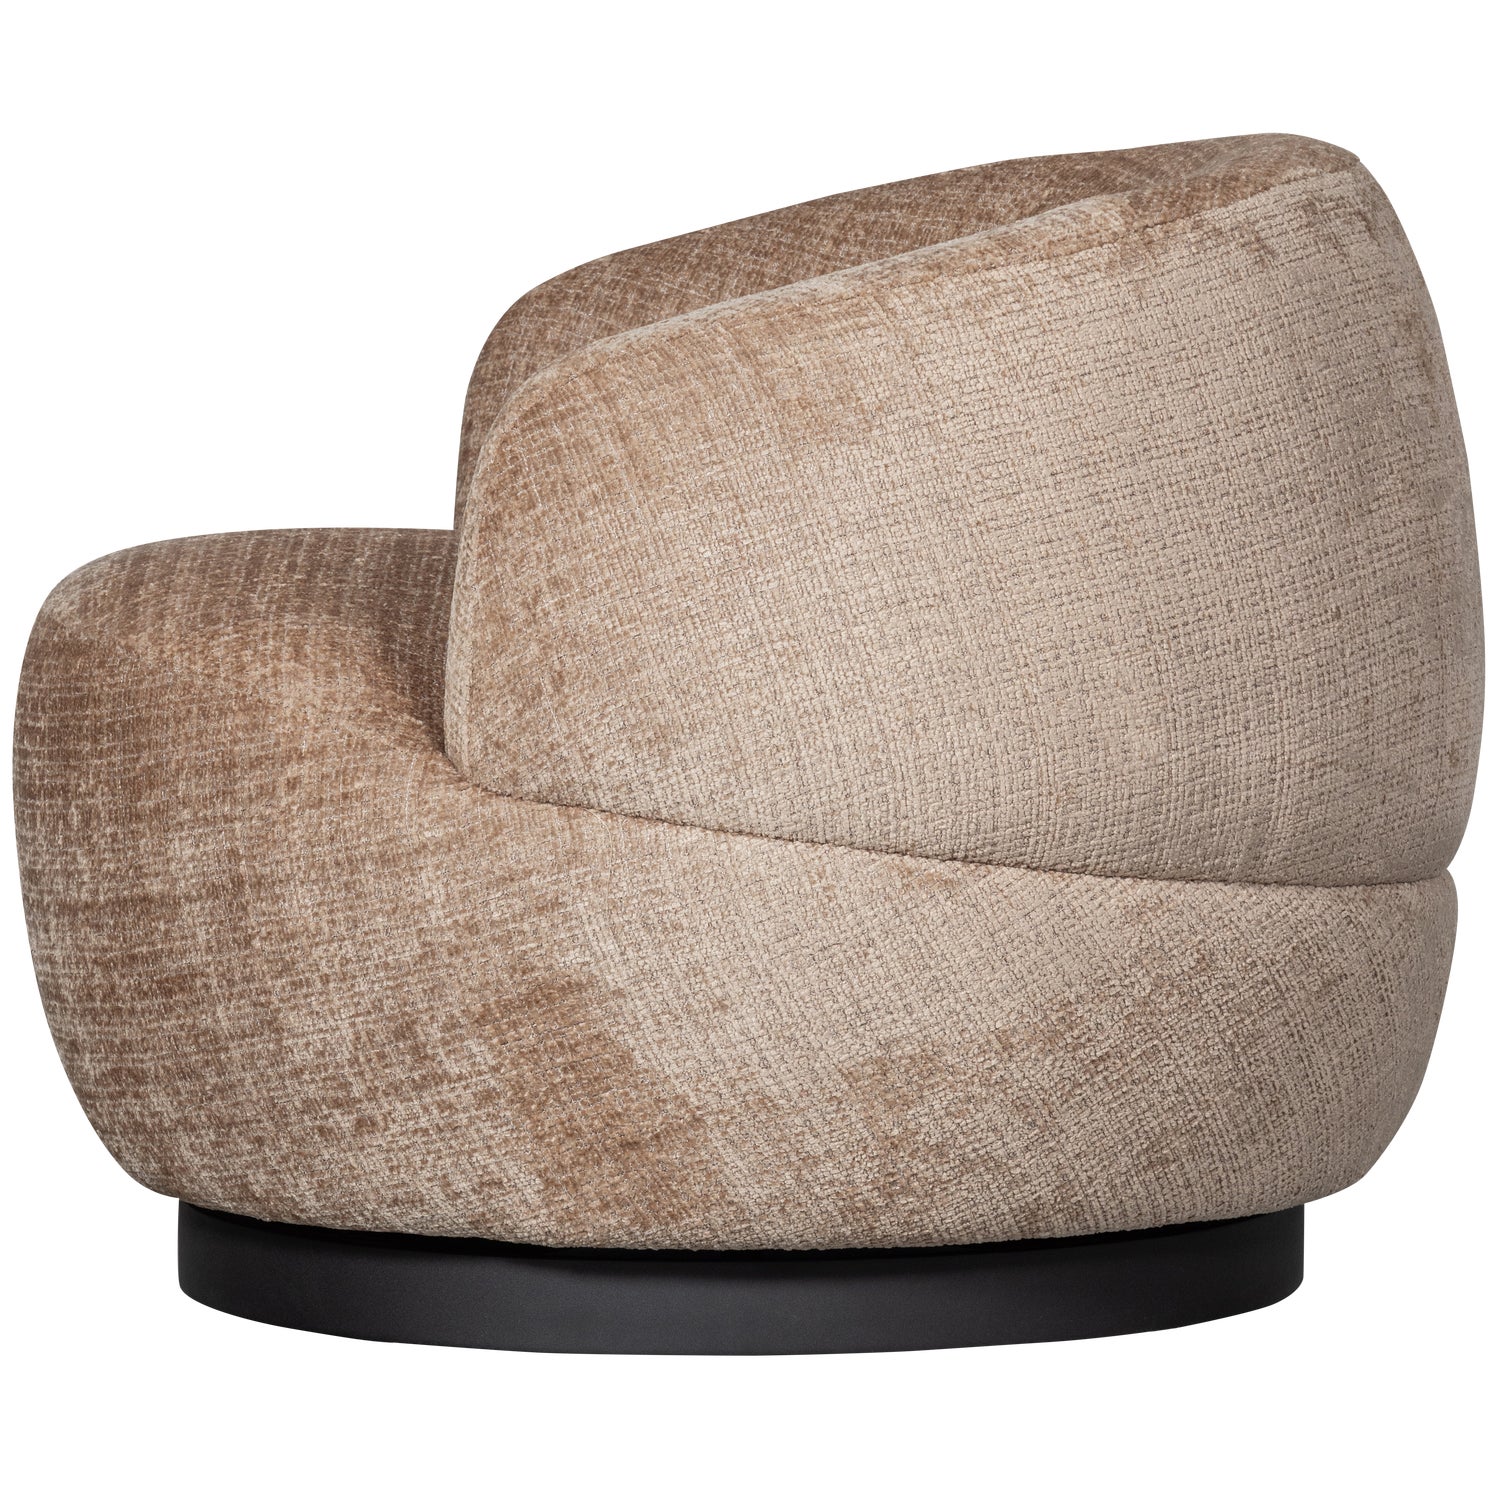 800037-S-03_VS_FA_Woolly_draaifauteuil_chenille_zand.png?auto=webp&format=png&width=1500&height=1500